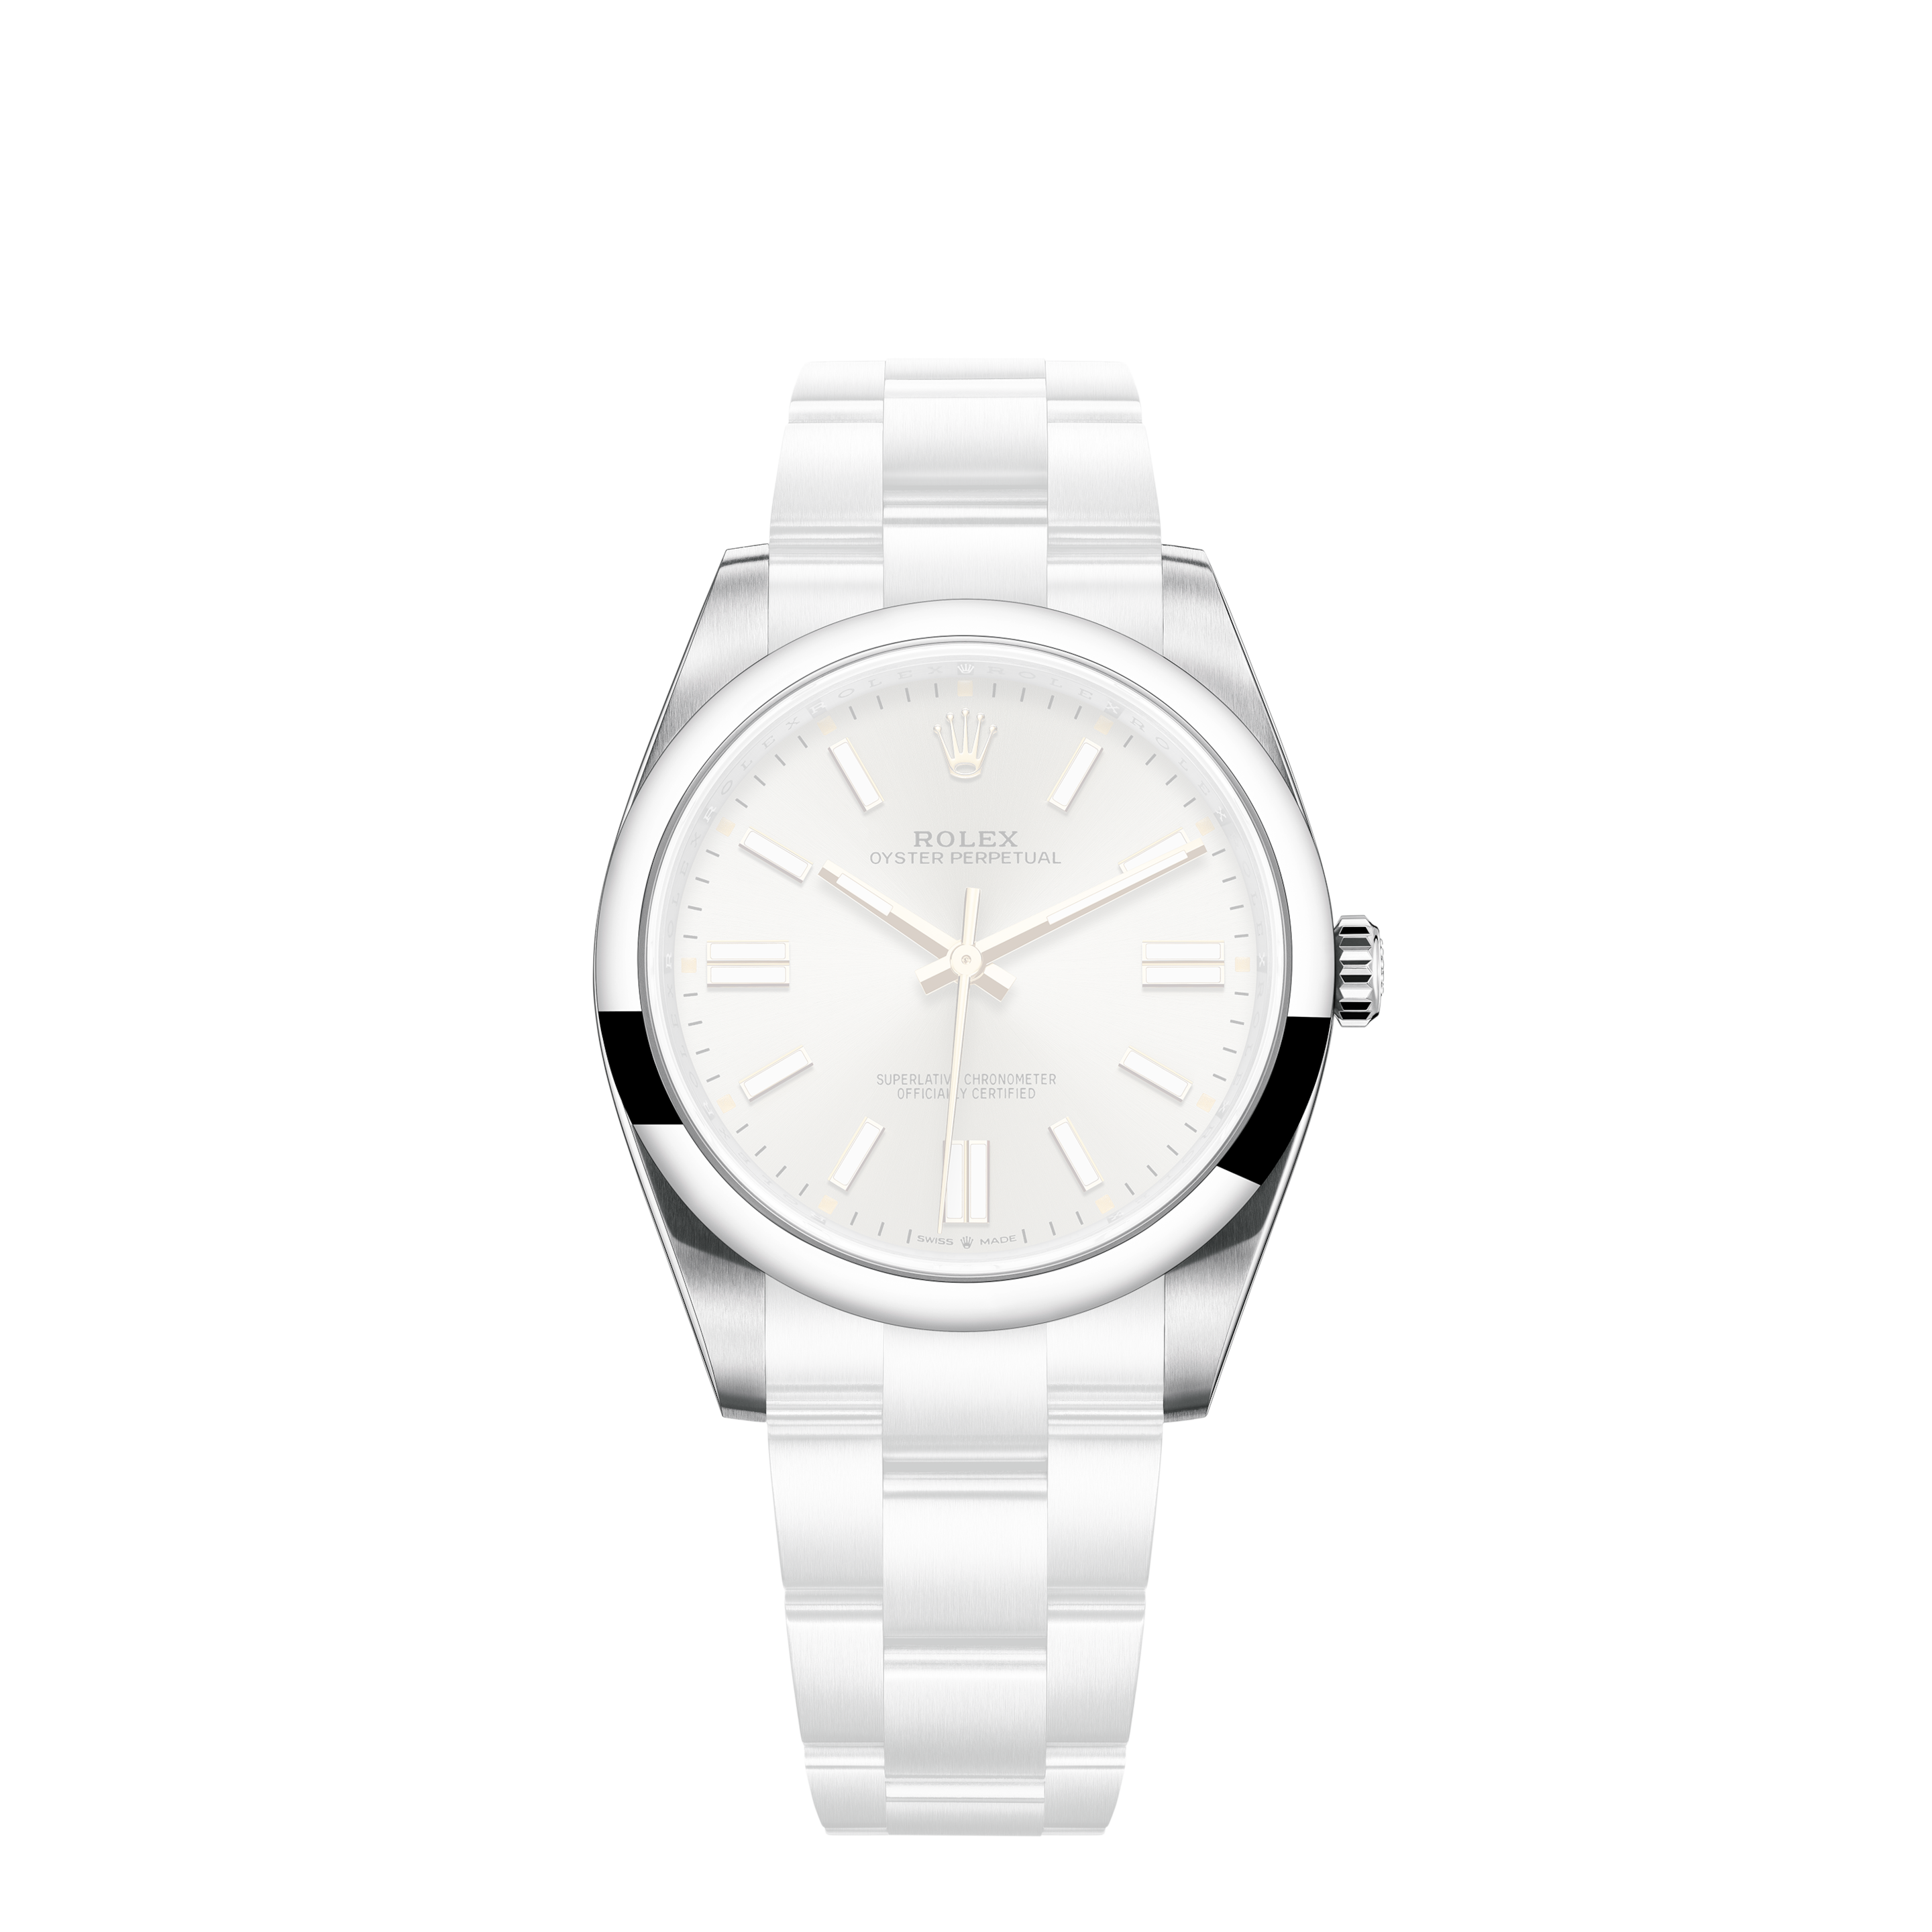 Rolex Lady-Datejust 26mm steel & 18ct gold 69173Rolex Lady-Datejust 26mm white gold bezel MOP dial - Rolex warranty - mother of pearl